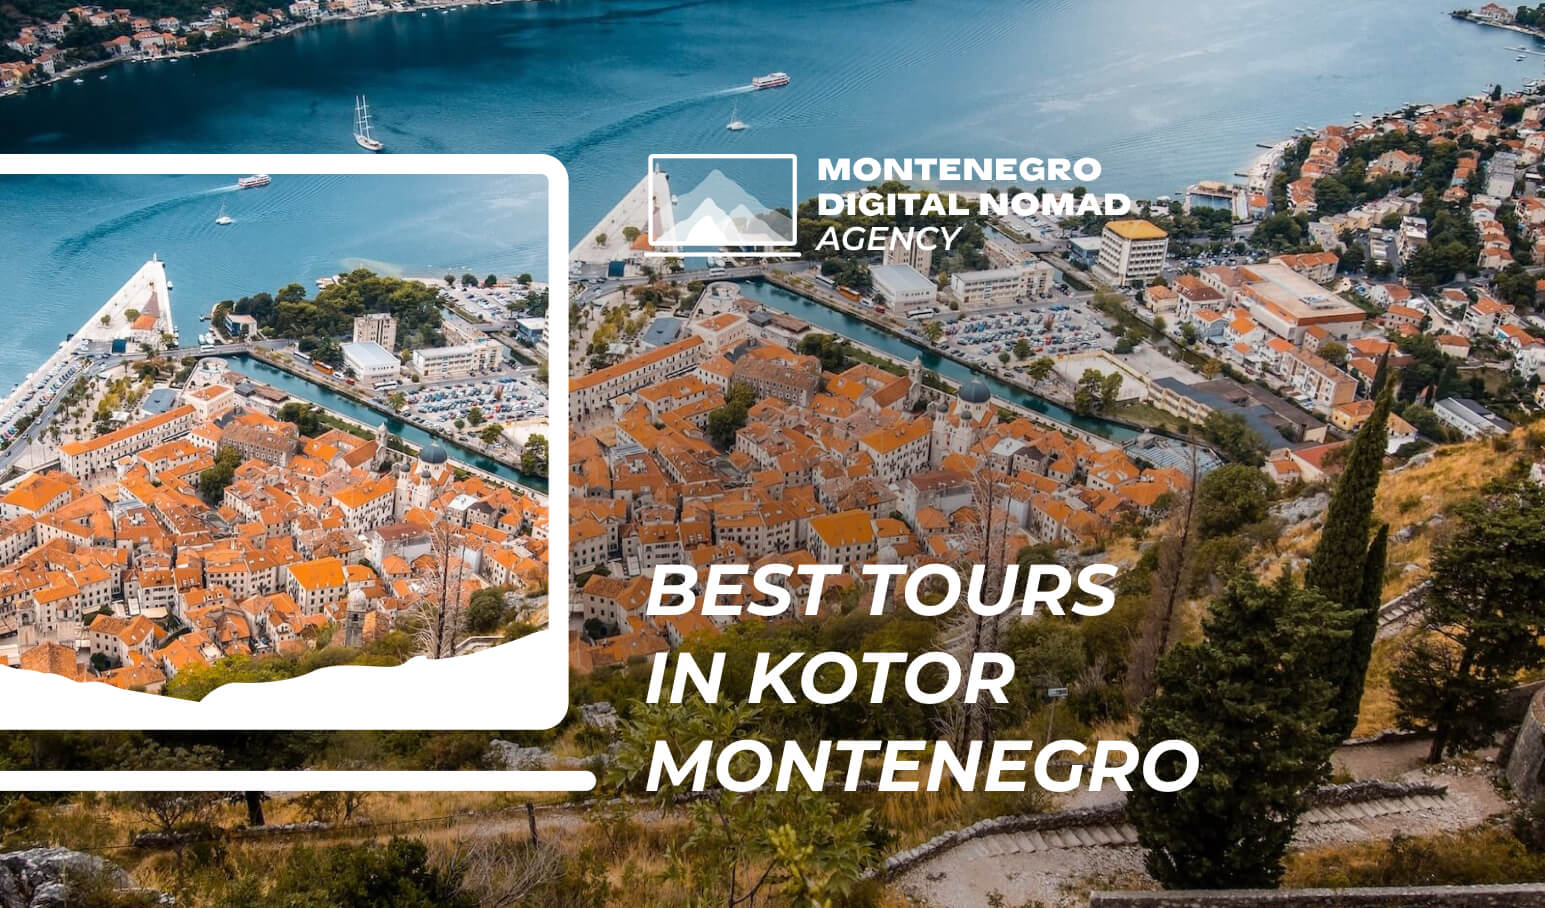 Image of Kotor from the mountain above with text overlay - 5 Best Tours in Kotor Montenegro